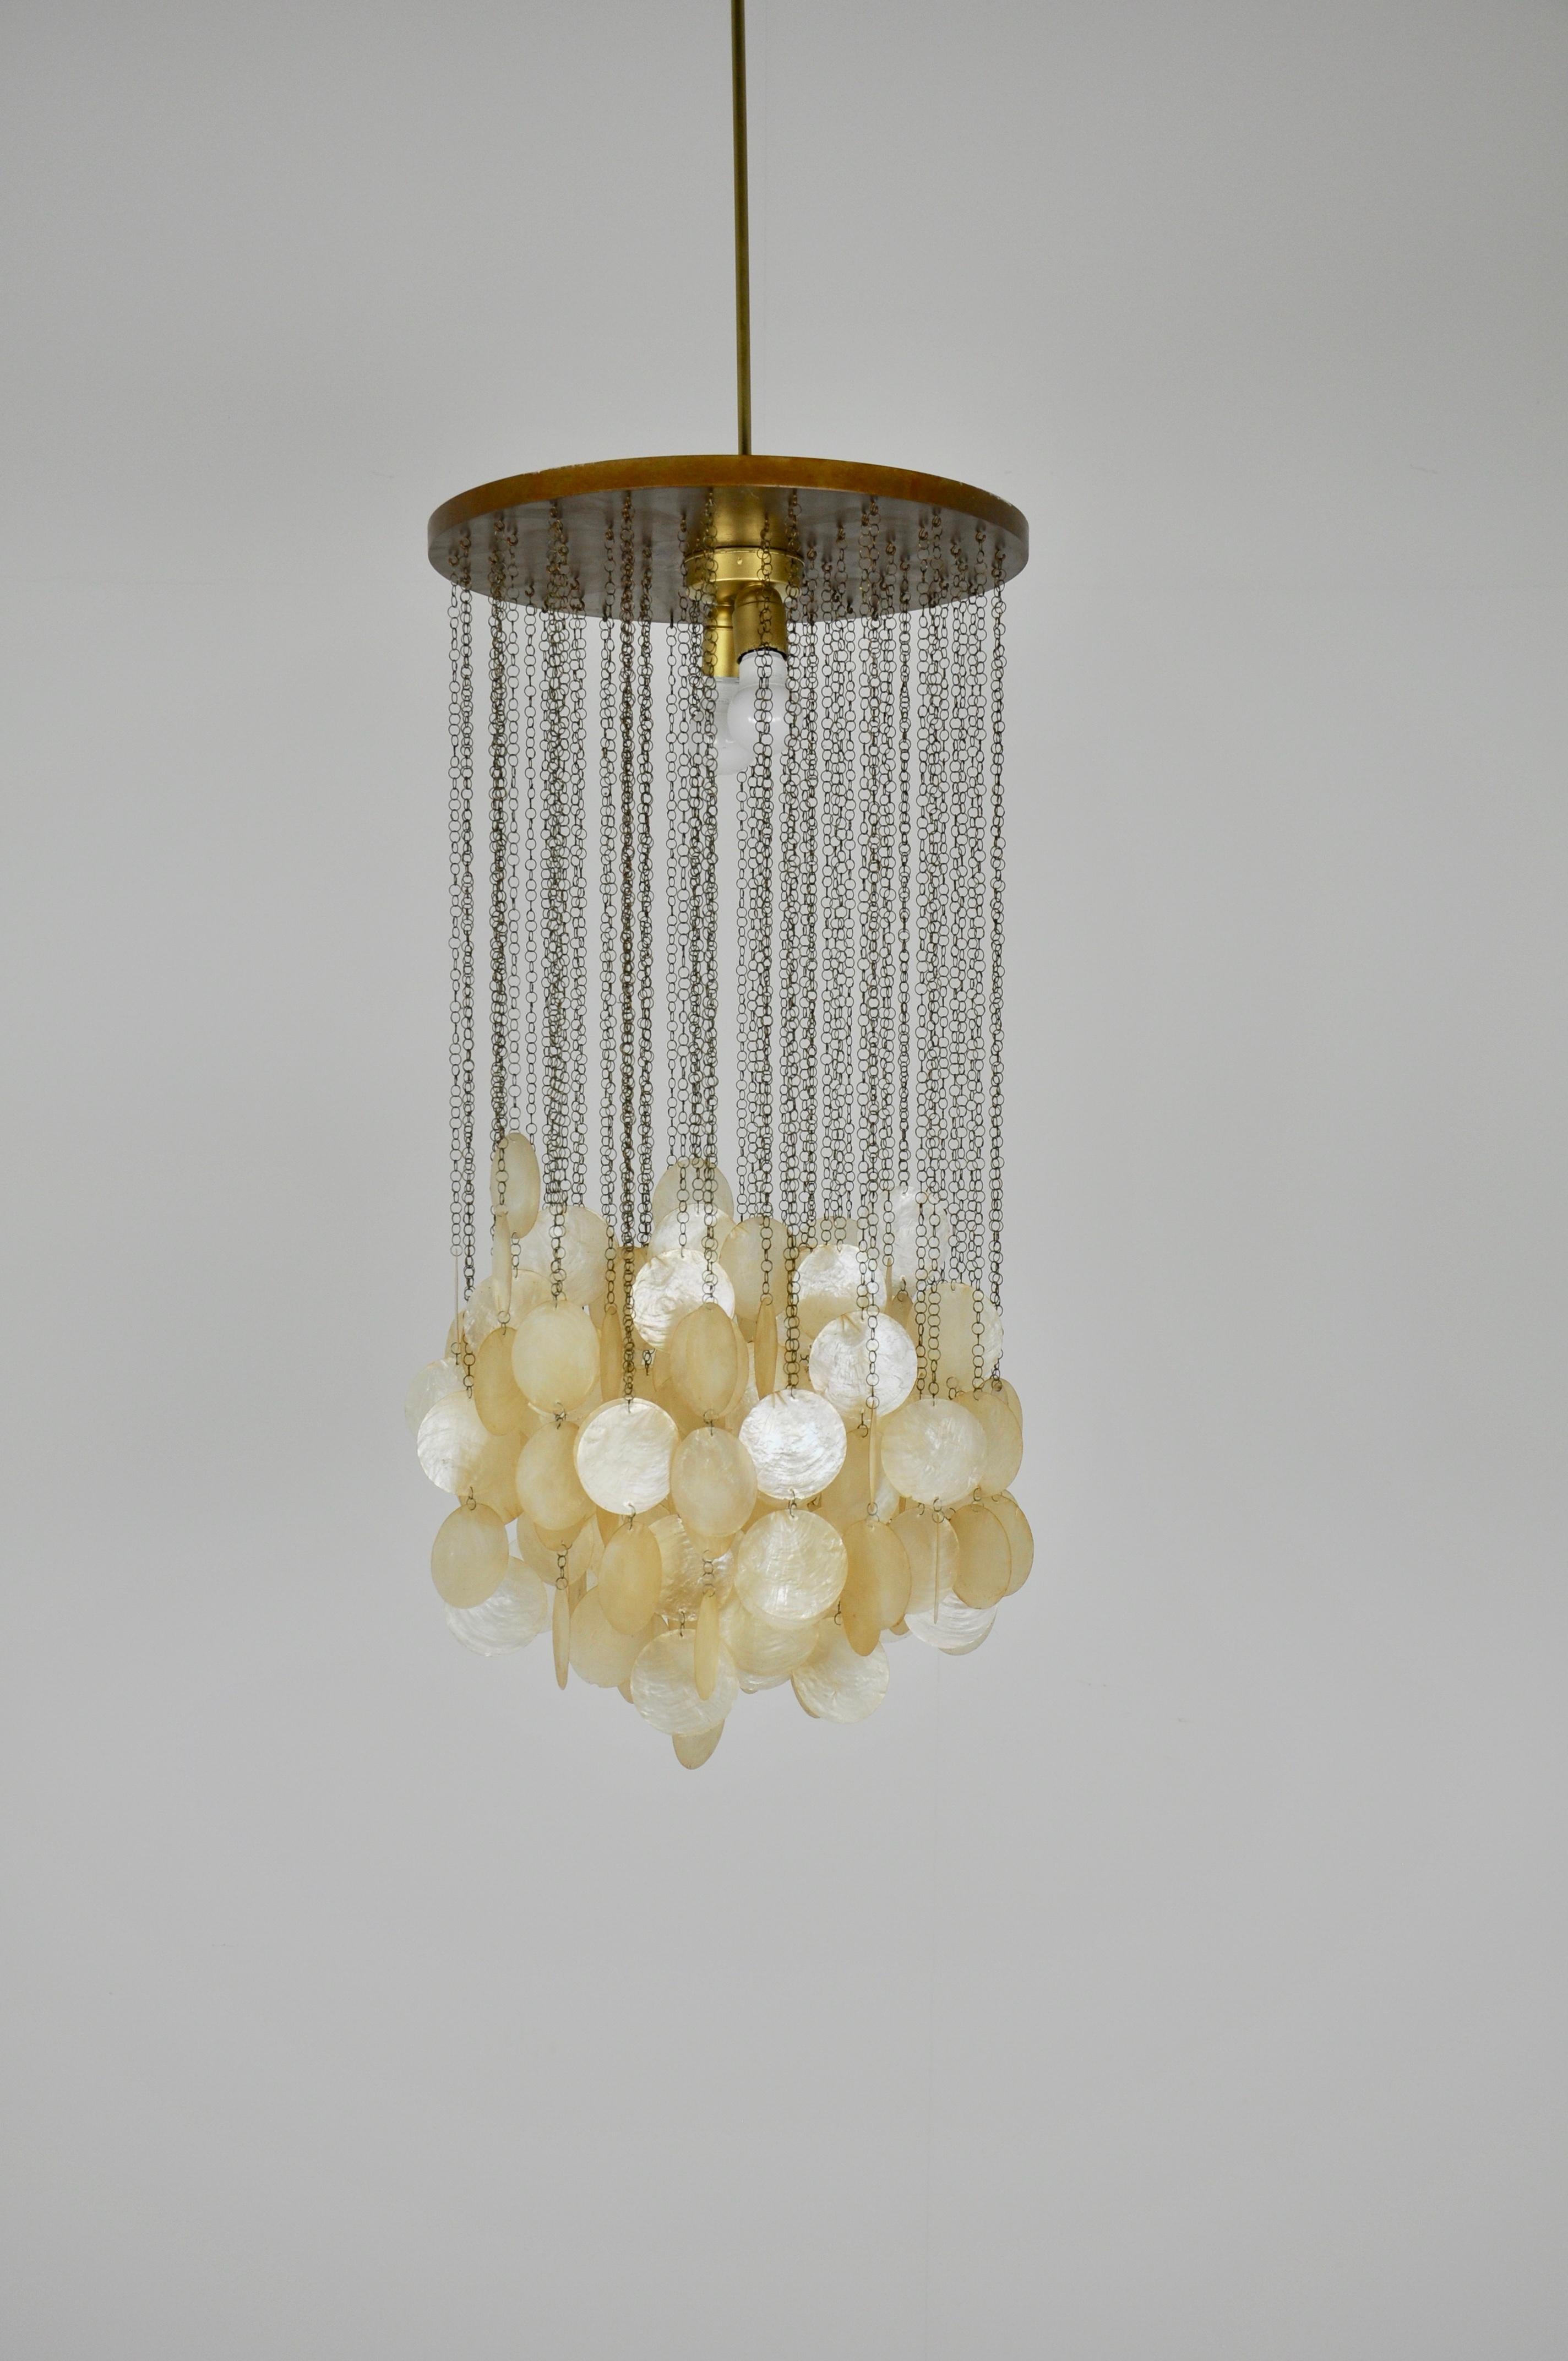 Mother of pearl and brass chandelier. Gold colored ceiling light.
Wear and tear due to time and age of the chandelier.